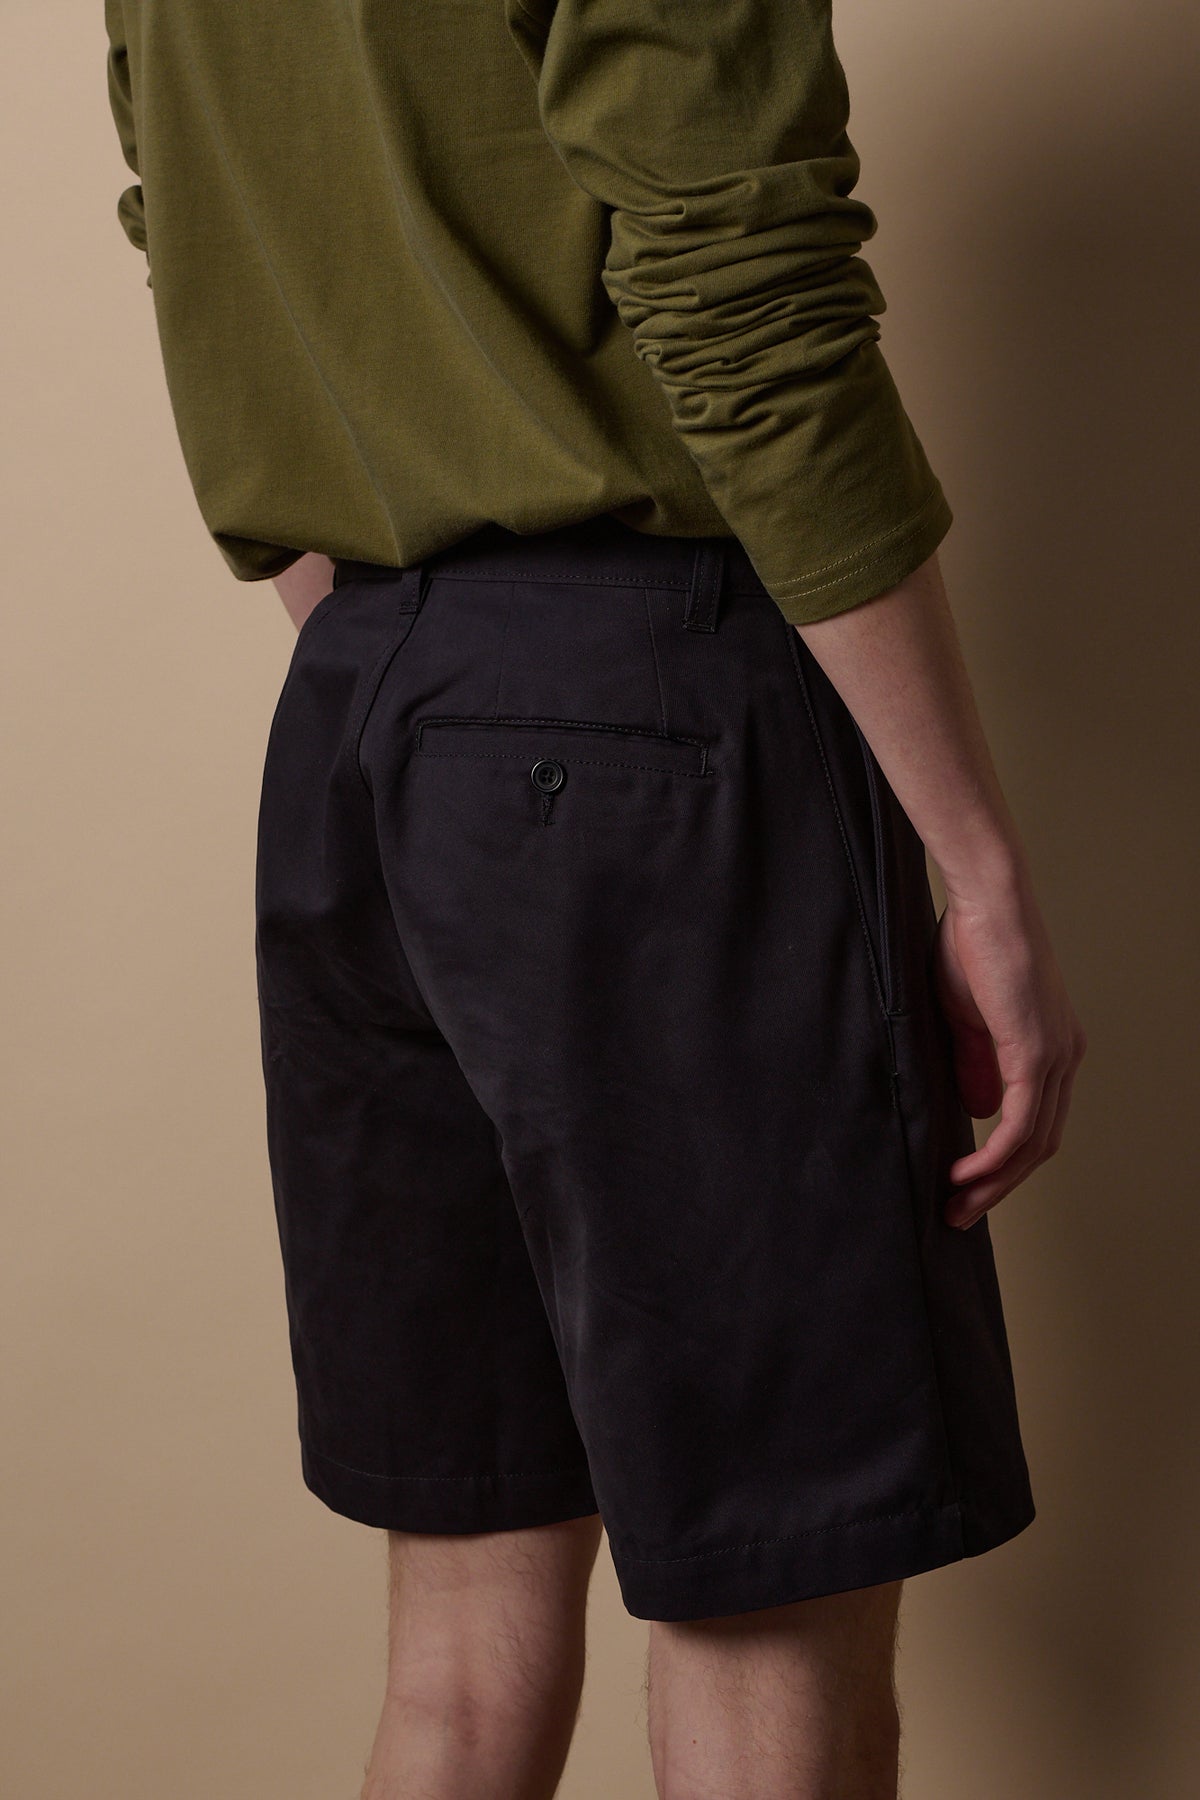 
            Back of pleated shorts in navy back pocket with button detail, beltloops on waistband